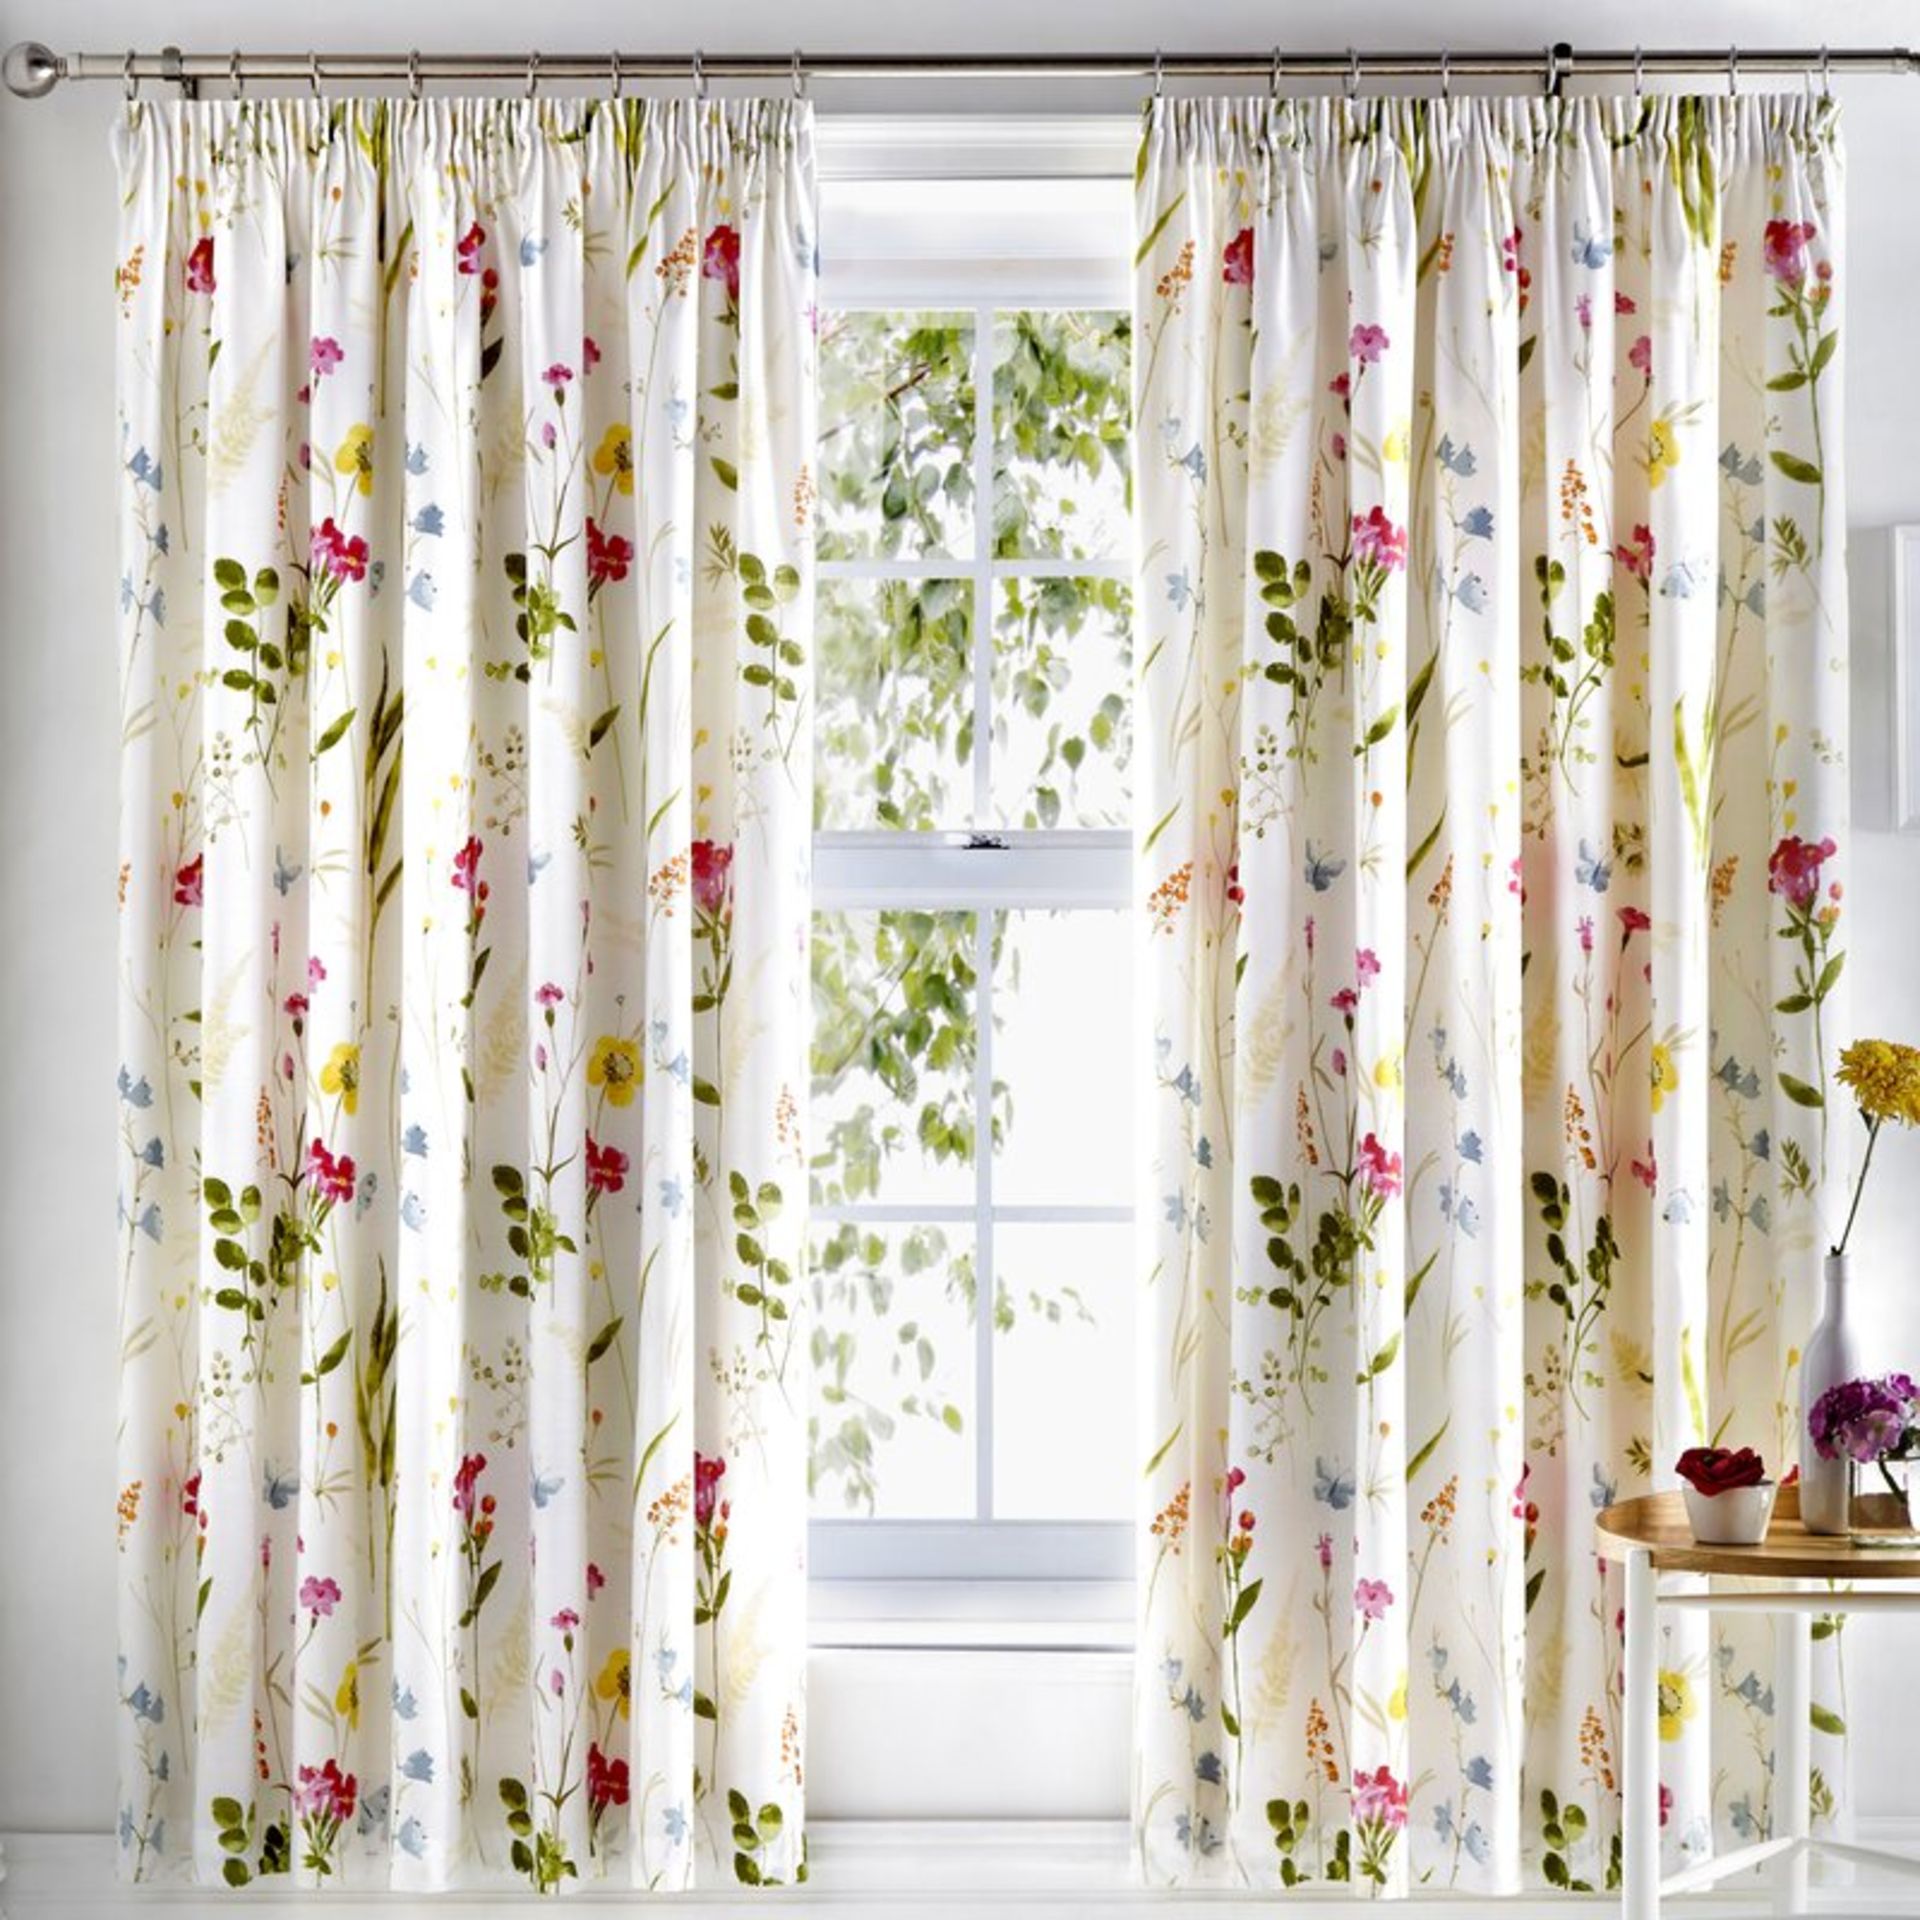 Delvale Pencil Pleat Room Darkening Curtains by Lily Manor